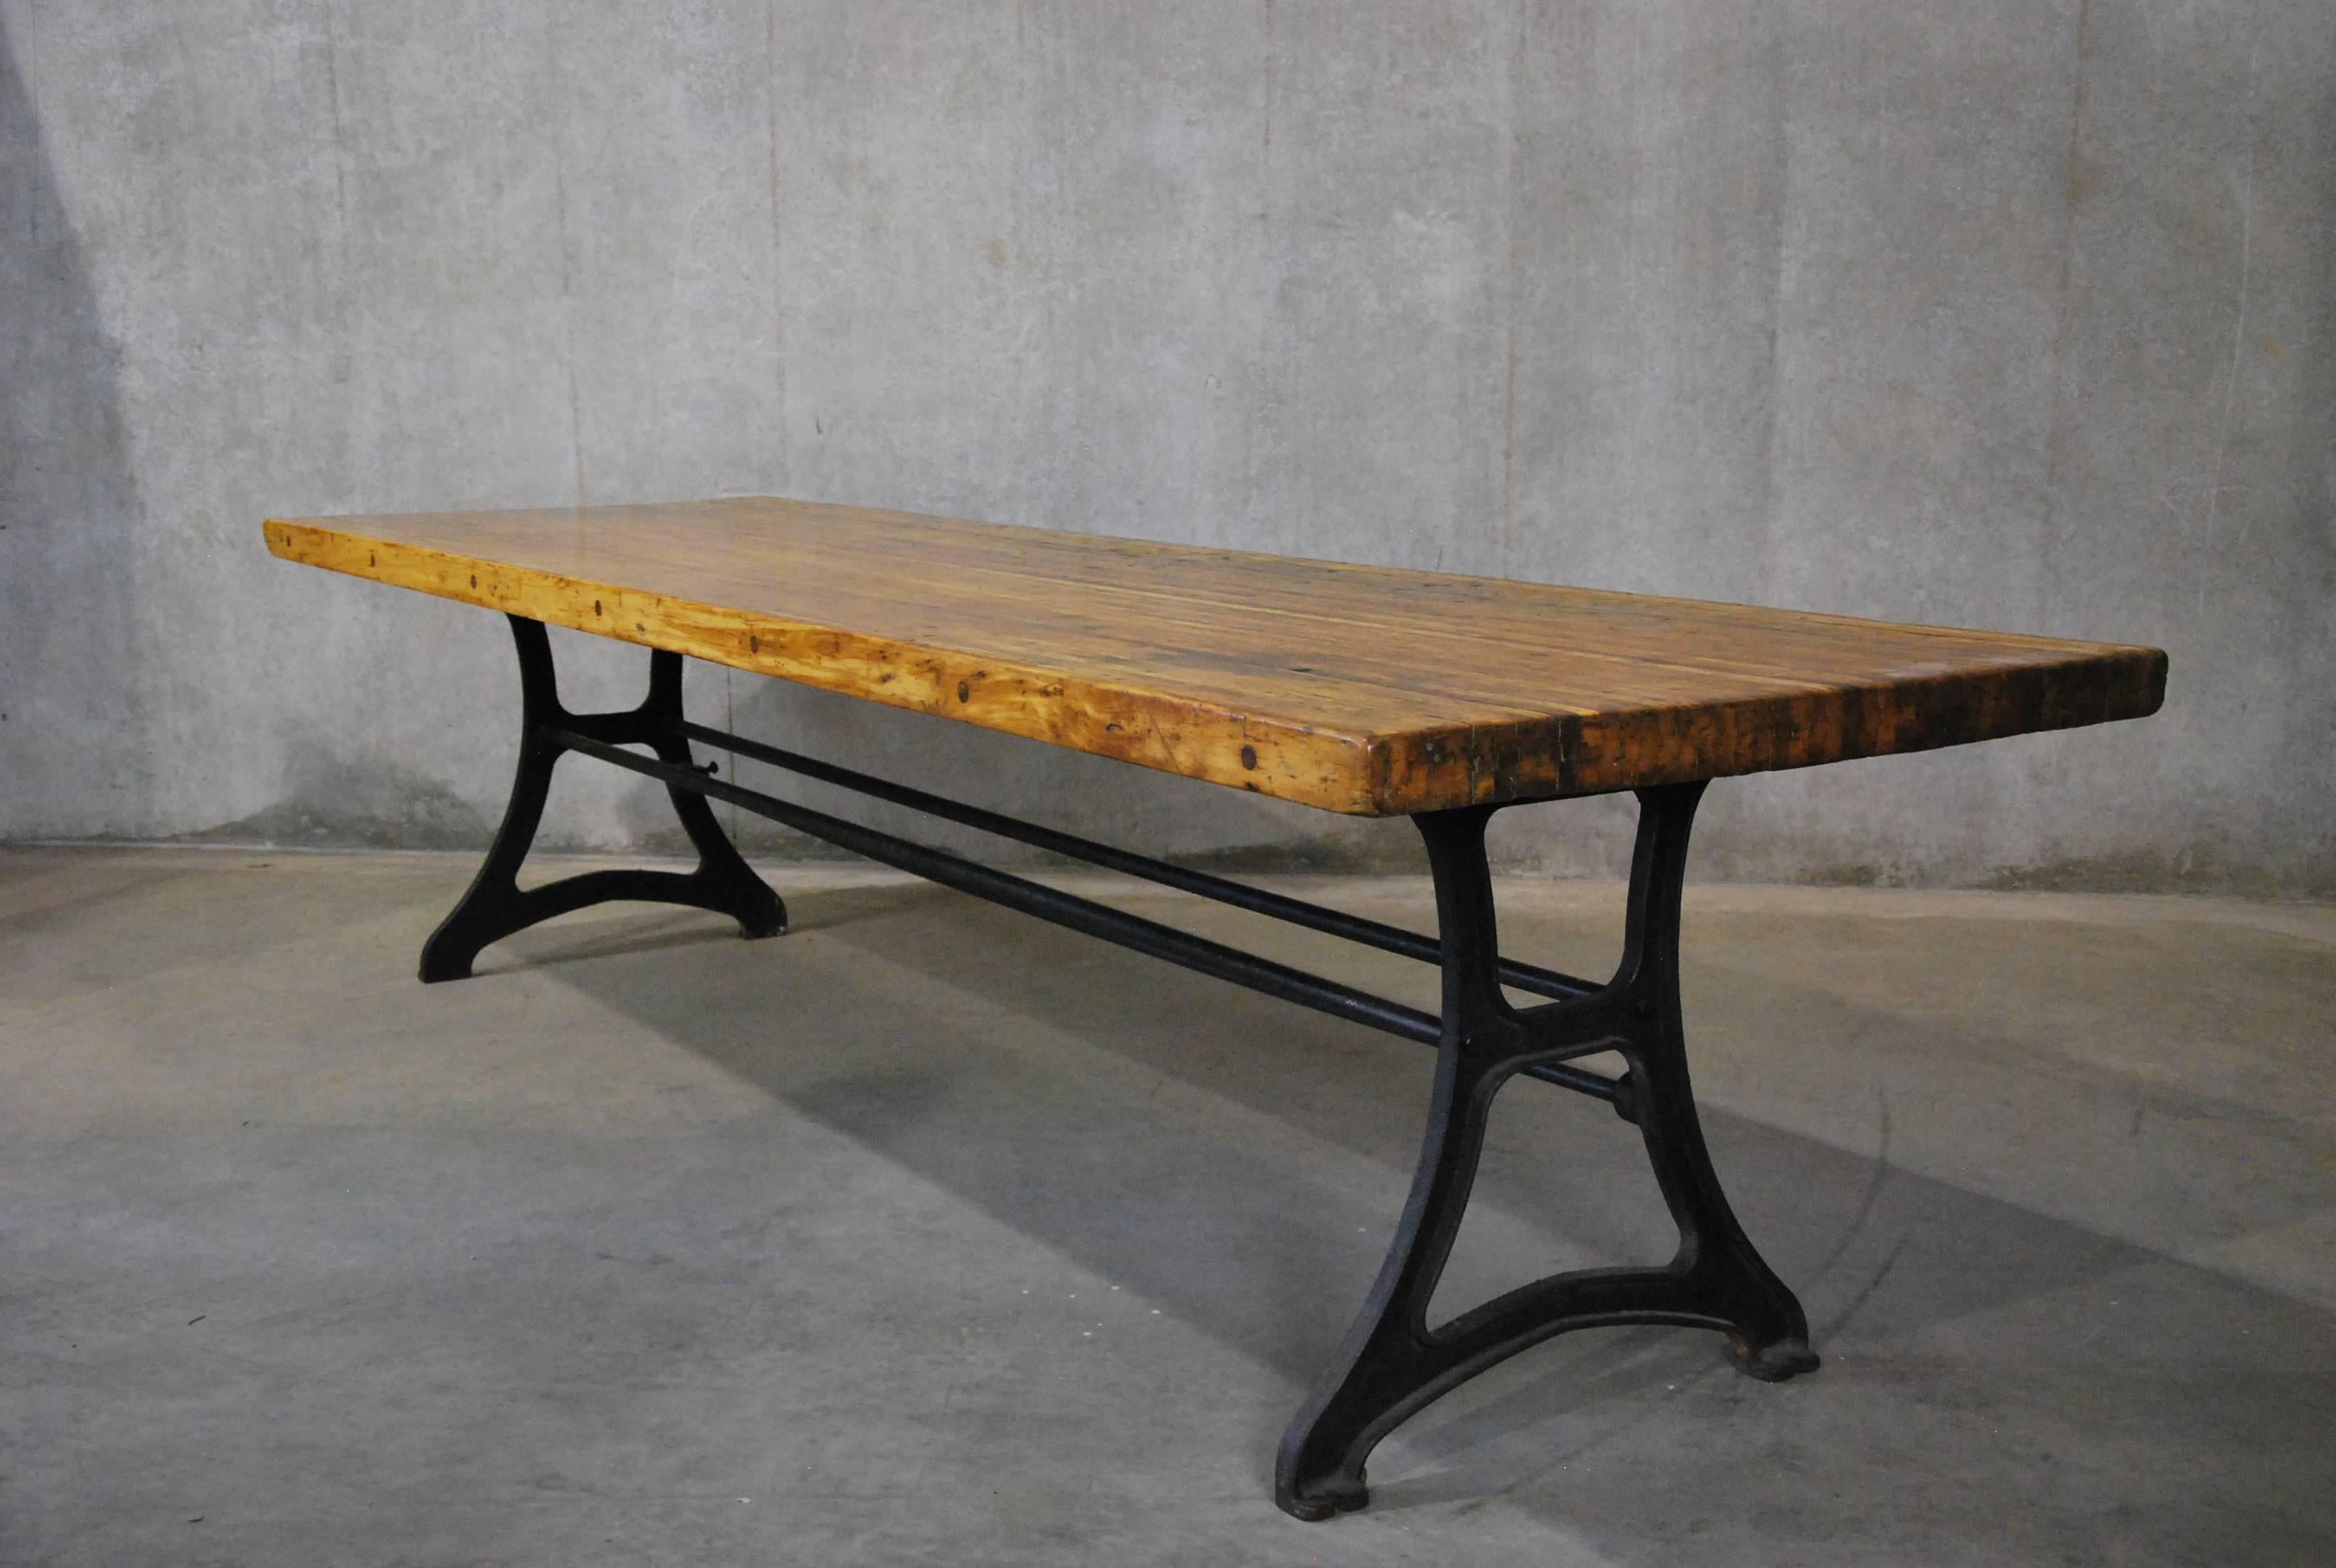 Cast 1920 10-foot Long Maple Industrial-Style Dining Table